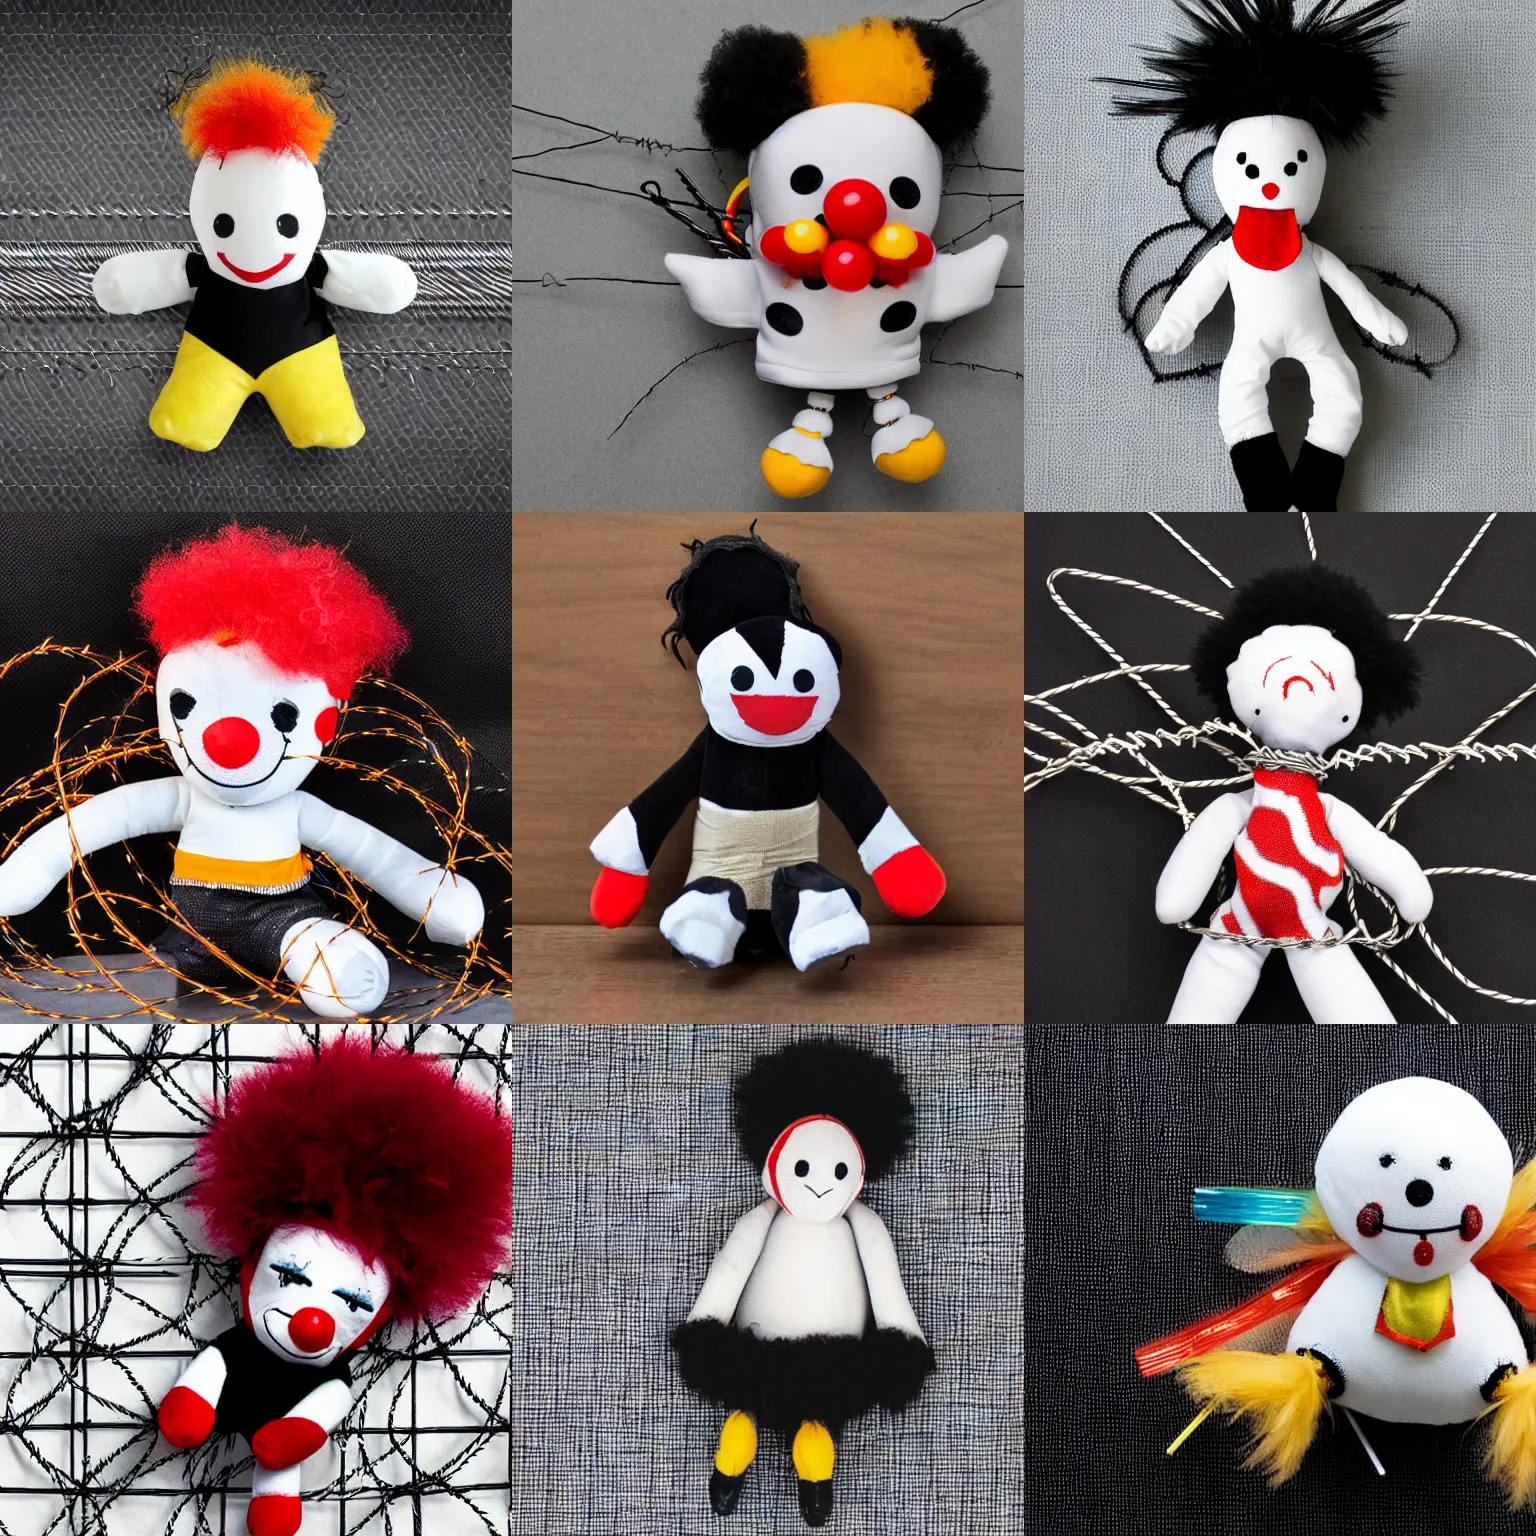 Prompt: sad cute clown pierrot plush doll wrapped in networking cables and barbed wire, with barbed wire wings, centered against a black velvet background